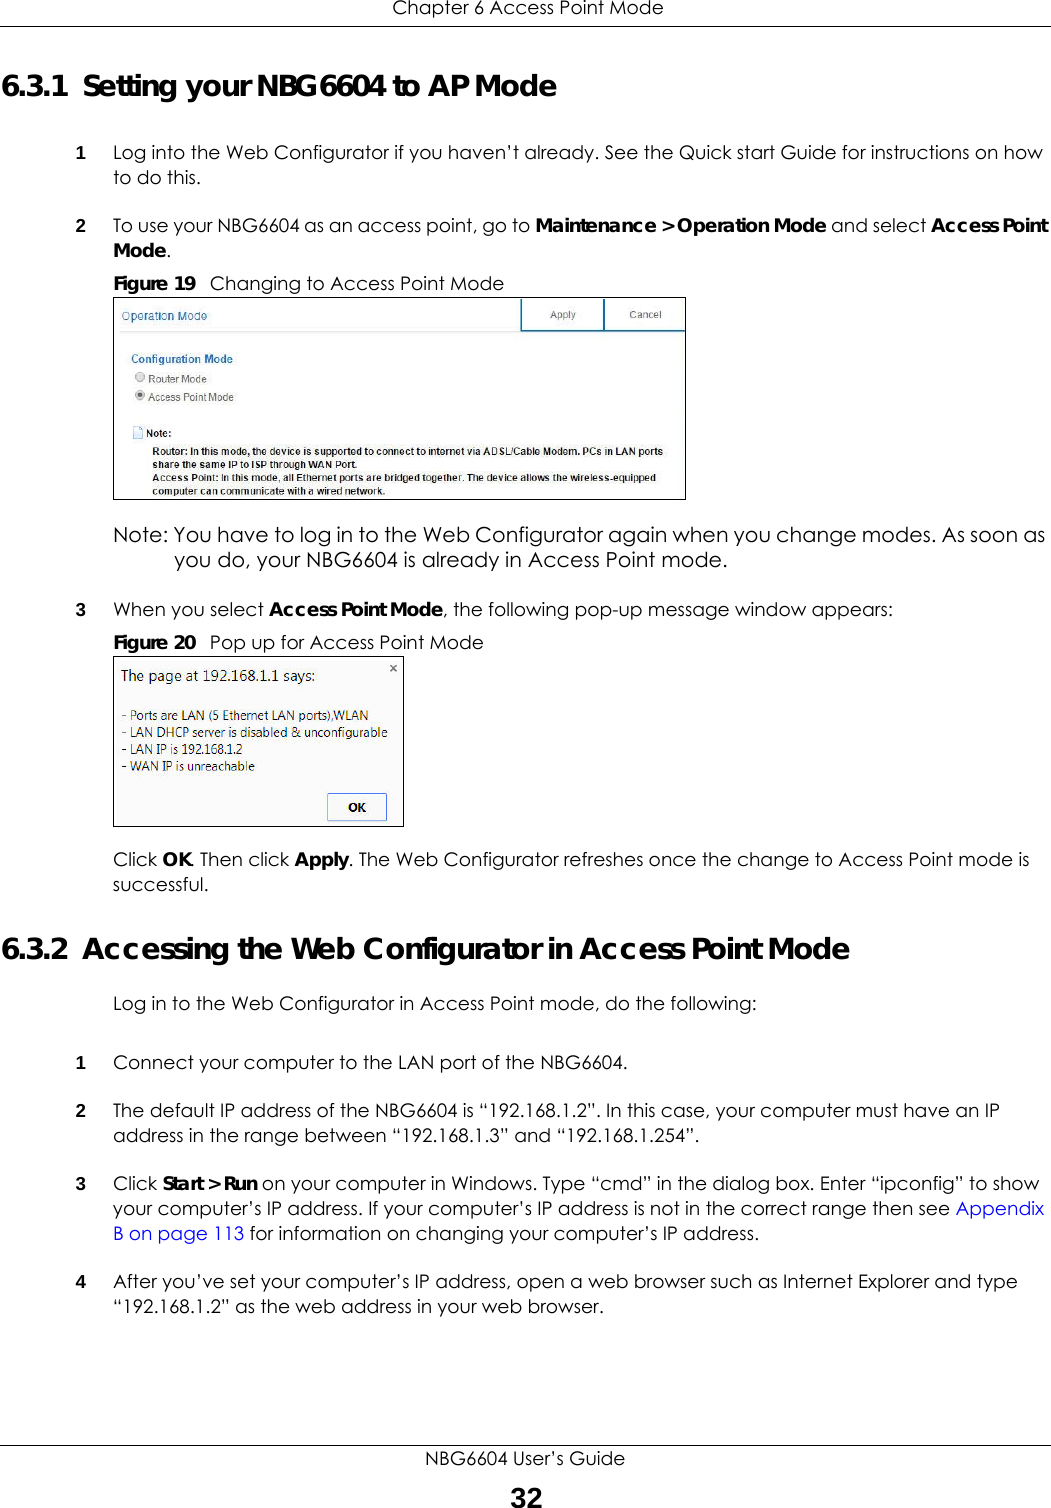  Chapter 6 Access Point ModeNBG6604 User’s Guide326.3.1  Setting your NBG6604 to AP Mode1Log into the Web Configurator if you haven’t already. See the Quick start Guide for instructions on how to do this.2To use your NBG6604 as an access point, go to Maintenance &gt; Operation Mode and select Access Point Mode. Figure 19   Changing to Access Point ModeNote: You have to log in to the Web Configurator again when you change modes. As soon as you do, your NBG6604 is already in Access Point mode.3When you select Access Point Mode, the following pop-up message window appears:Figure 20   Pop up for Access Point Mode Click OK. Then click Apply. The Web Configurator refreshes once the change to Access Point mode is successful.6.3.2  Accessing the Web Configurator in Access Point ModeLog in to the Web Configurator in Access Point mode, do the following:1Connect your computer to the LAN port of the NBG6604. 2The default IP address of the NBG6604 is “192.168.1.2”. In this case, your computer must have an IP address in the range between “192.168.1.3” and “192.168.1.254”.3Click Start &gt; Run on your computer in Windows. Type “cmd” in the dialog box. Enter “ipconfig” to show your computer’s IP address. If your computer’s IP address is not in the correct range then see Appendix B on page 113 for information on changing your computer’s IP address.4After you’ve set your computer’s IP address, open a web browser such as Internet Explorer and type “192.168.1.2” as the web address in your web browser.